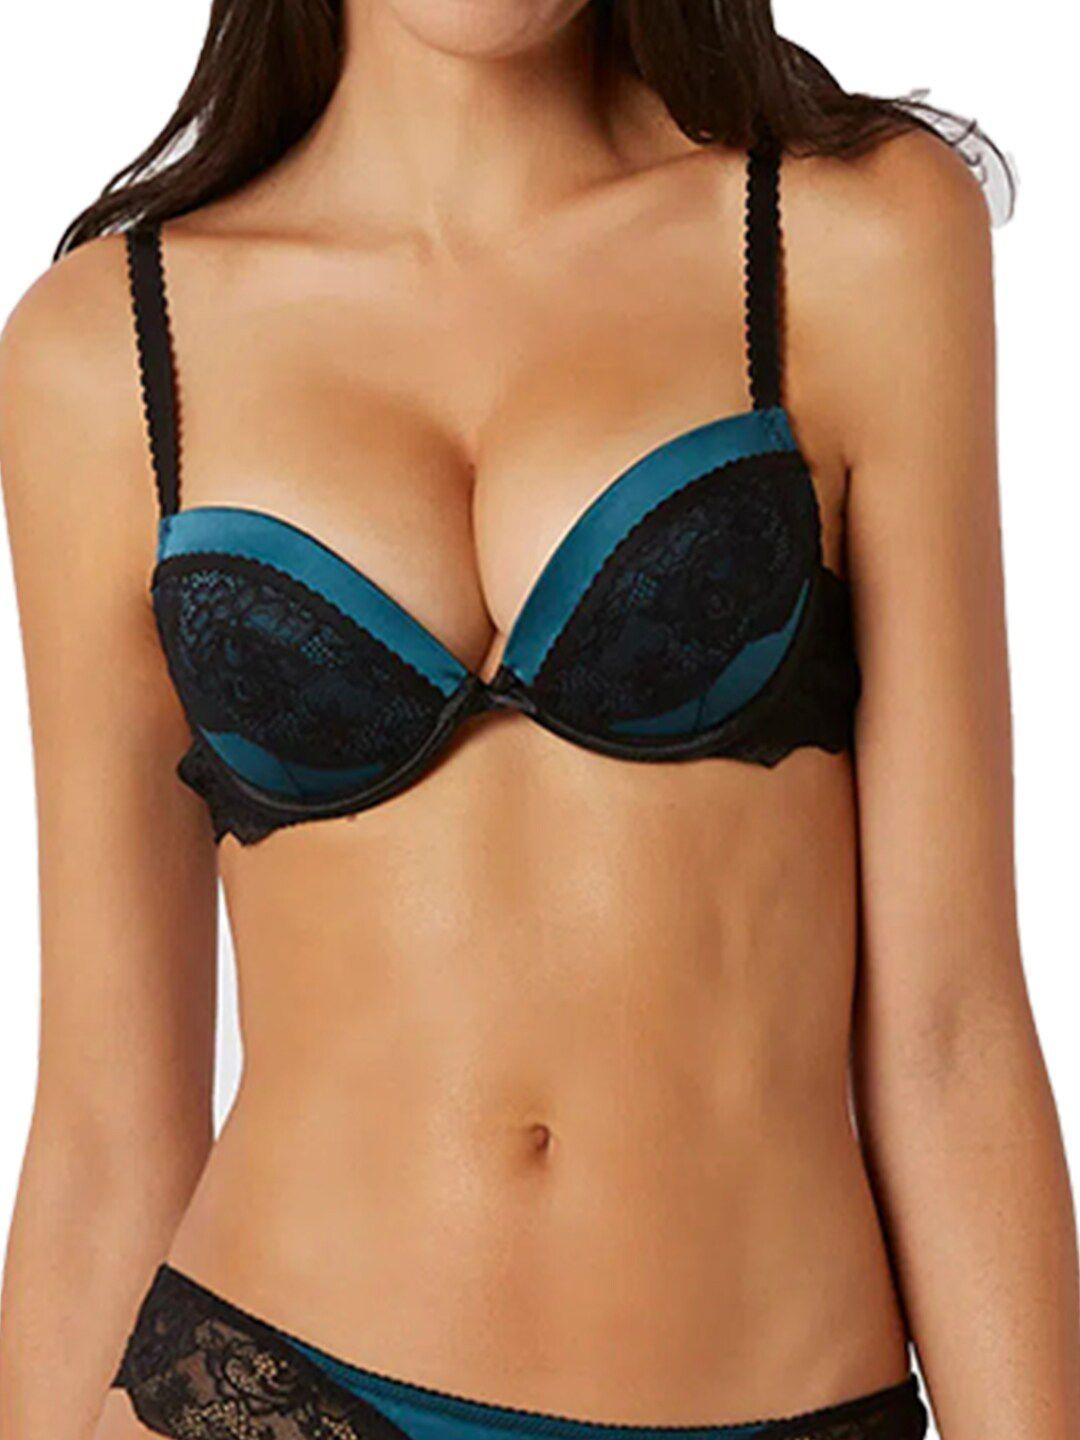 yamamay-floral-underwired-non-padded-full-coverage-360-degree-support-seamless-push-up-bra